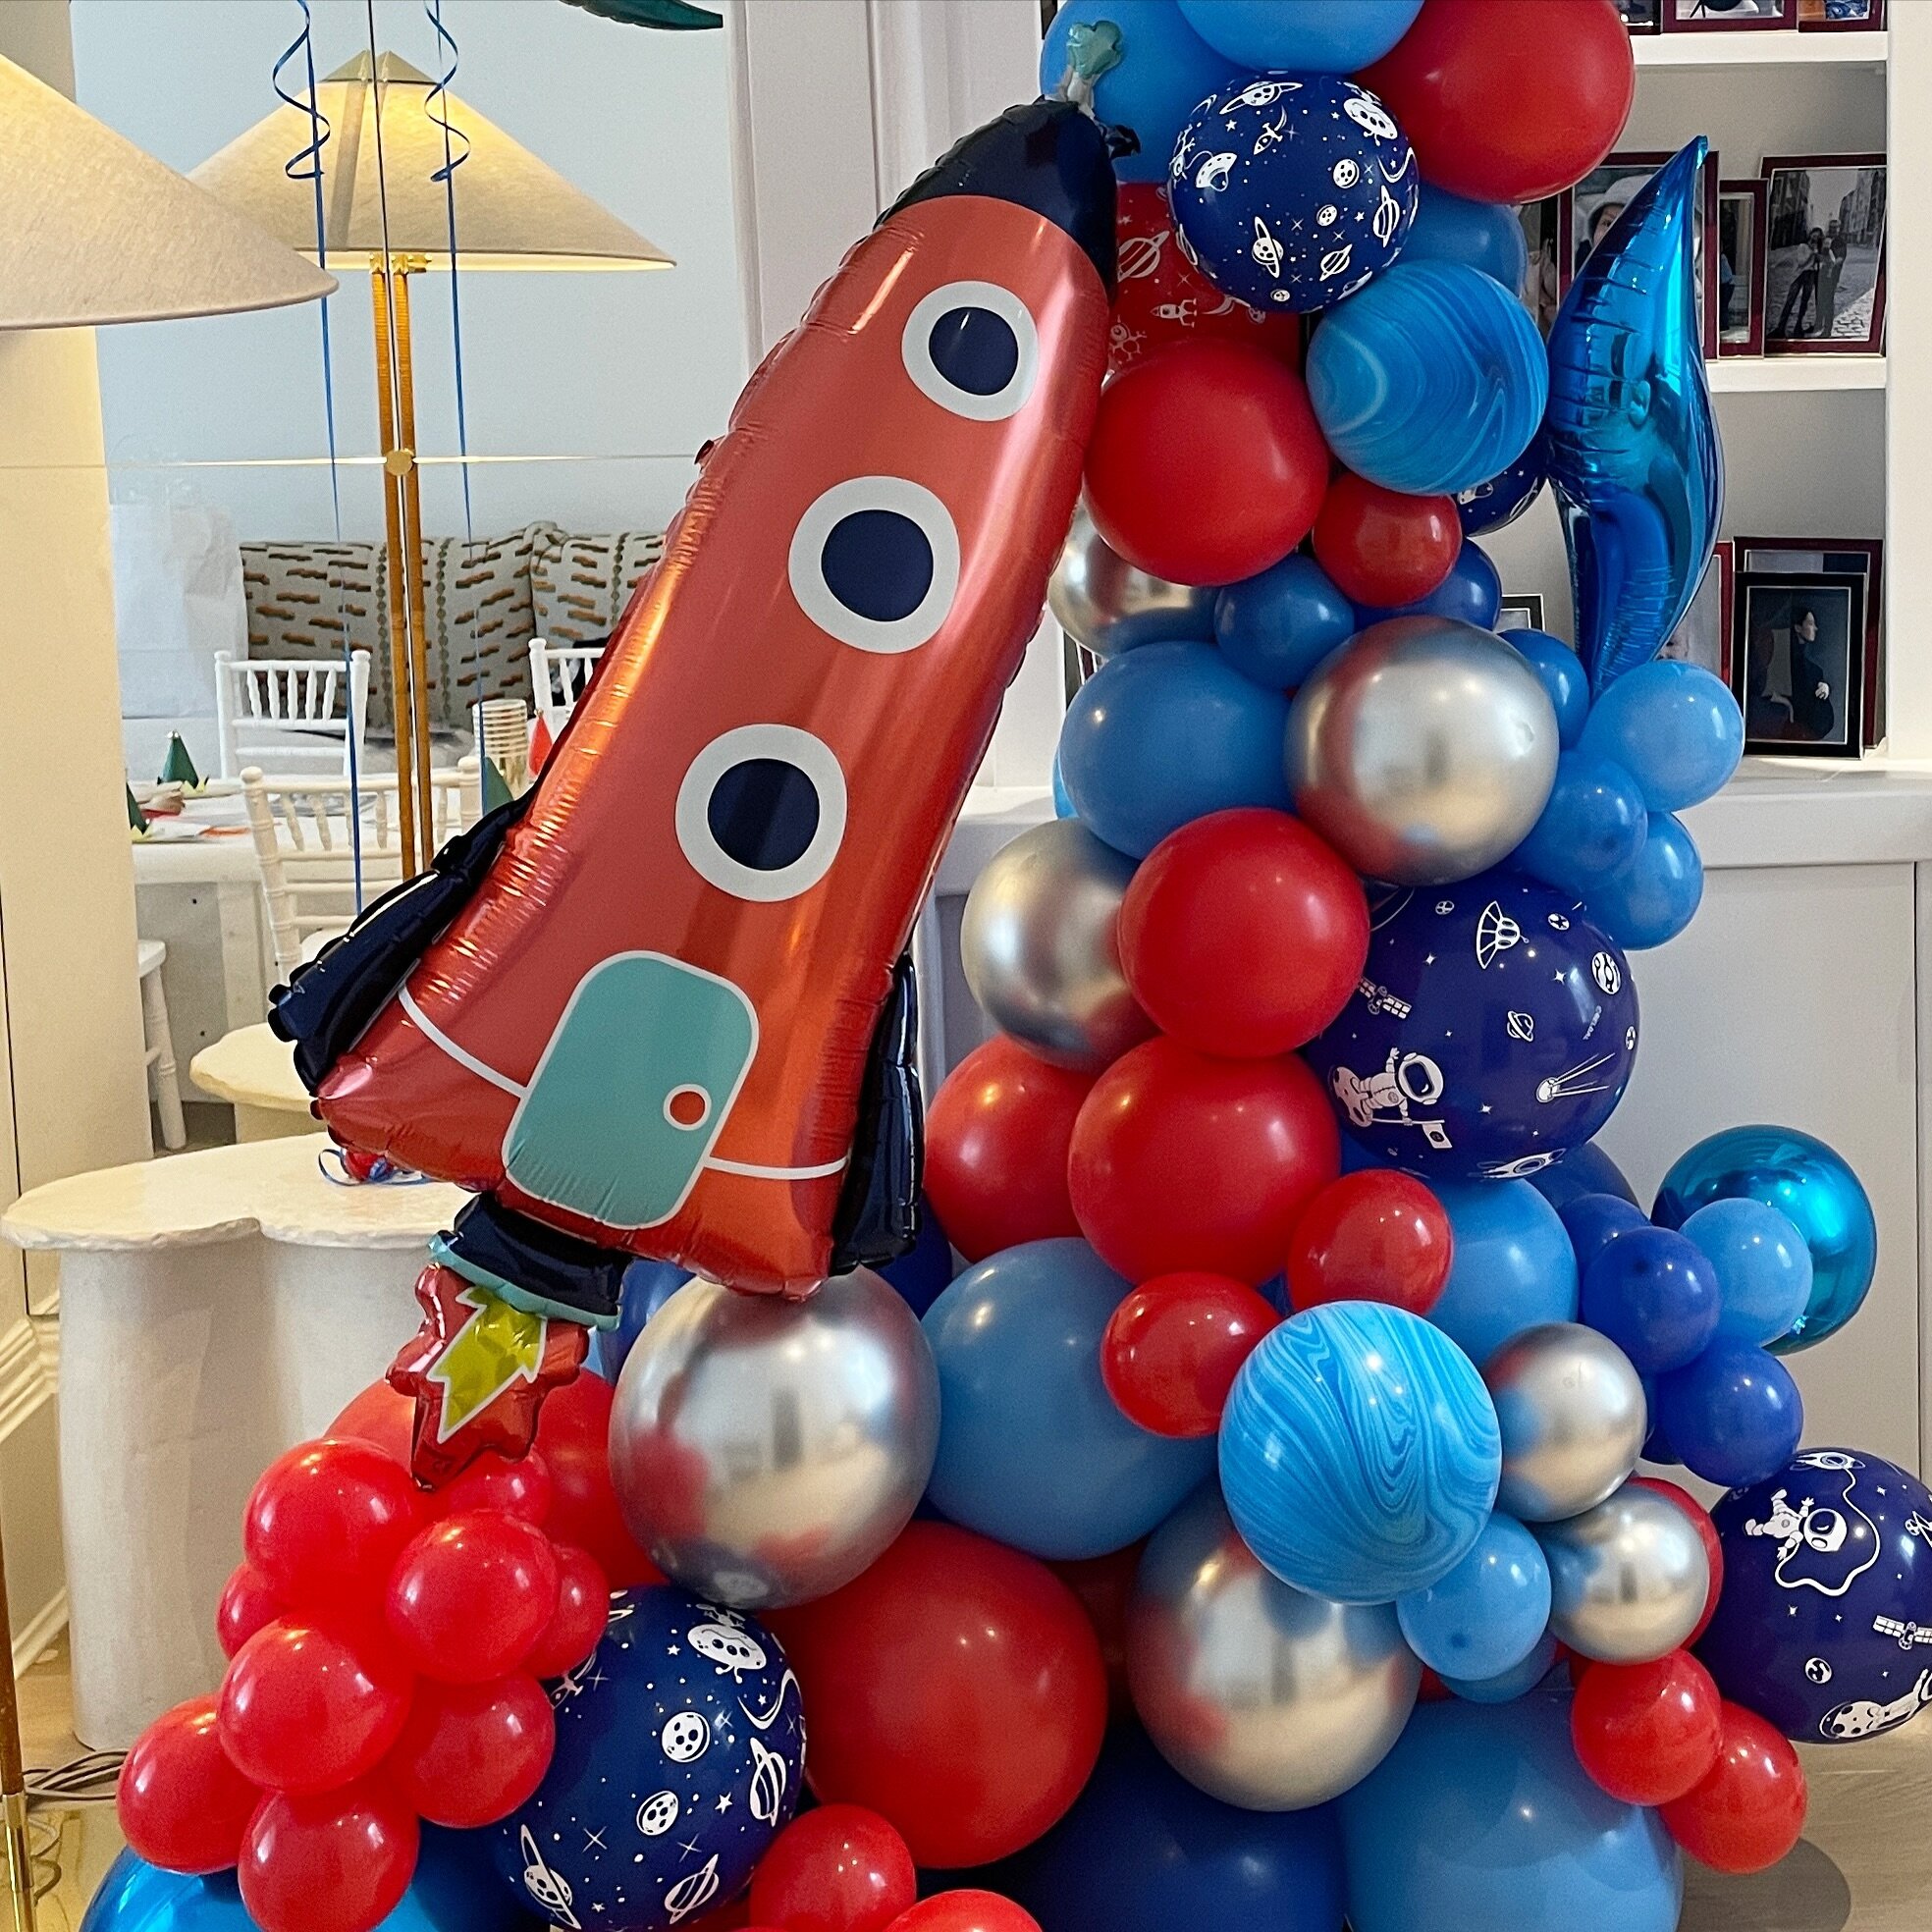 Zoom, zoom, zoom, we&rsquo;re going to the moon. 
.
Happy 2nd Birthday Rocket Man!
.
.
#balloondecor
#birthdayballoons 
#rocket
#londonballoons
#nottinghill
#londonlife